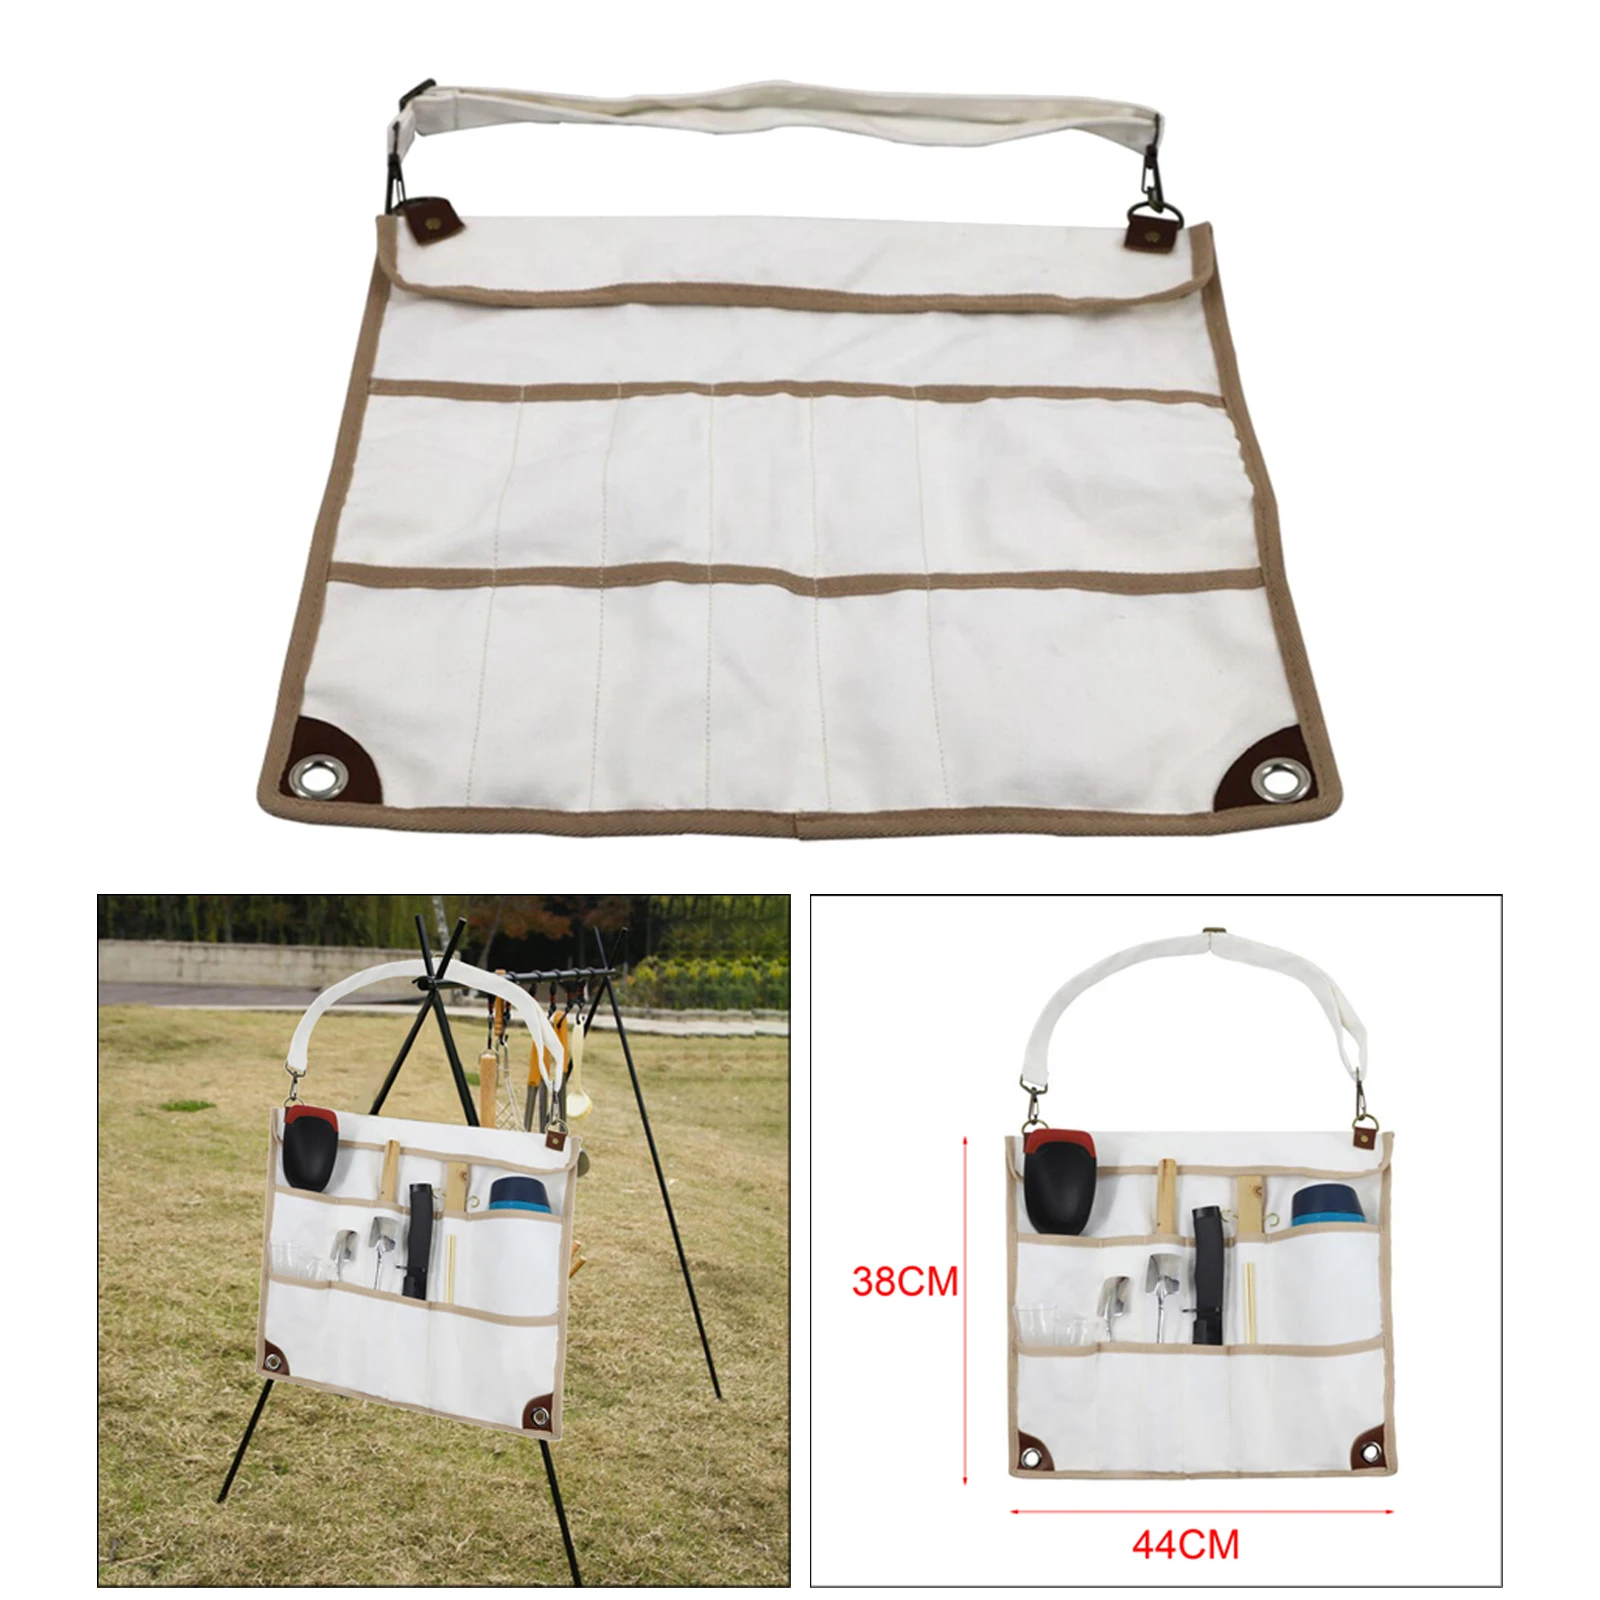 Foldable Camping Picnic Tableware Storage Bag Barbecue Kitchen Utensil Multi-Compartment ing Organizer Carrying Bags